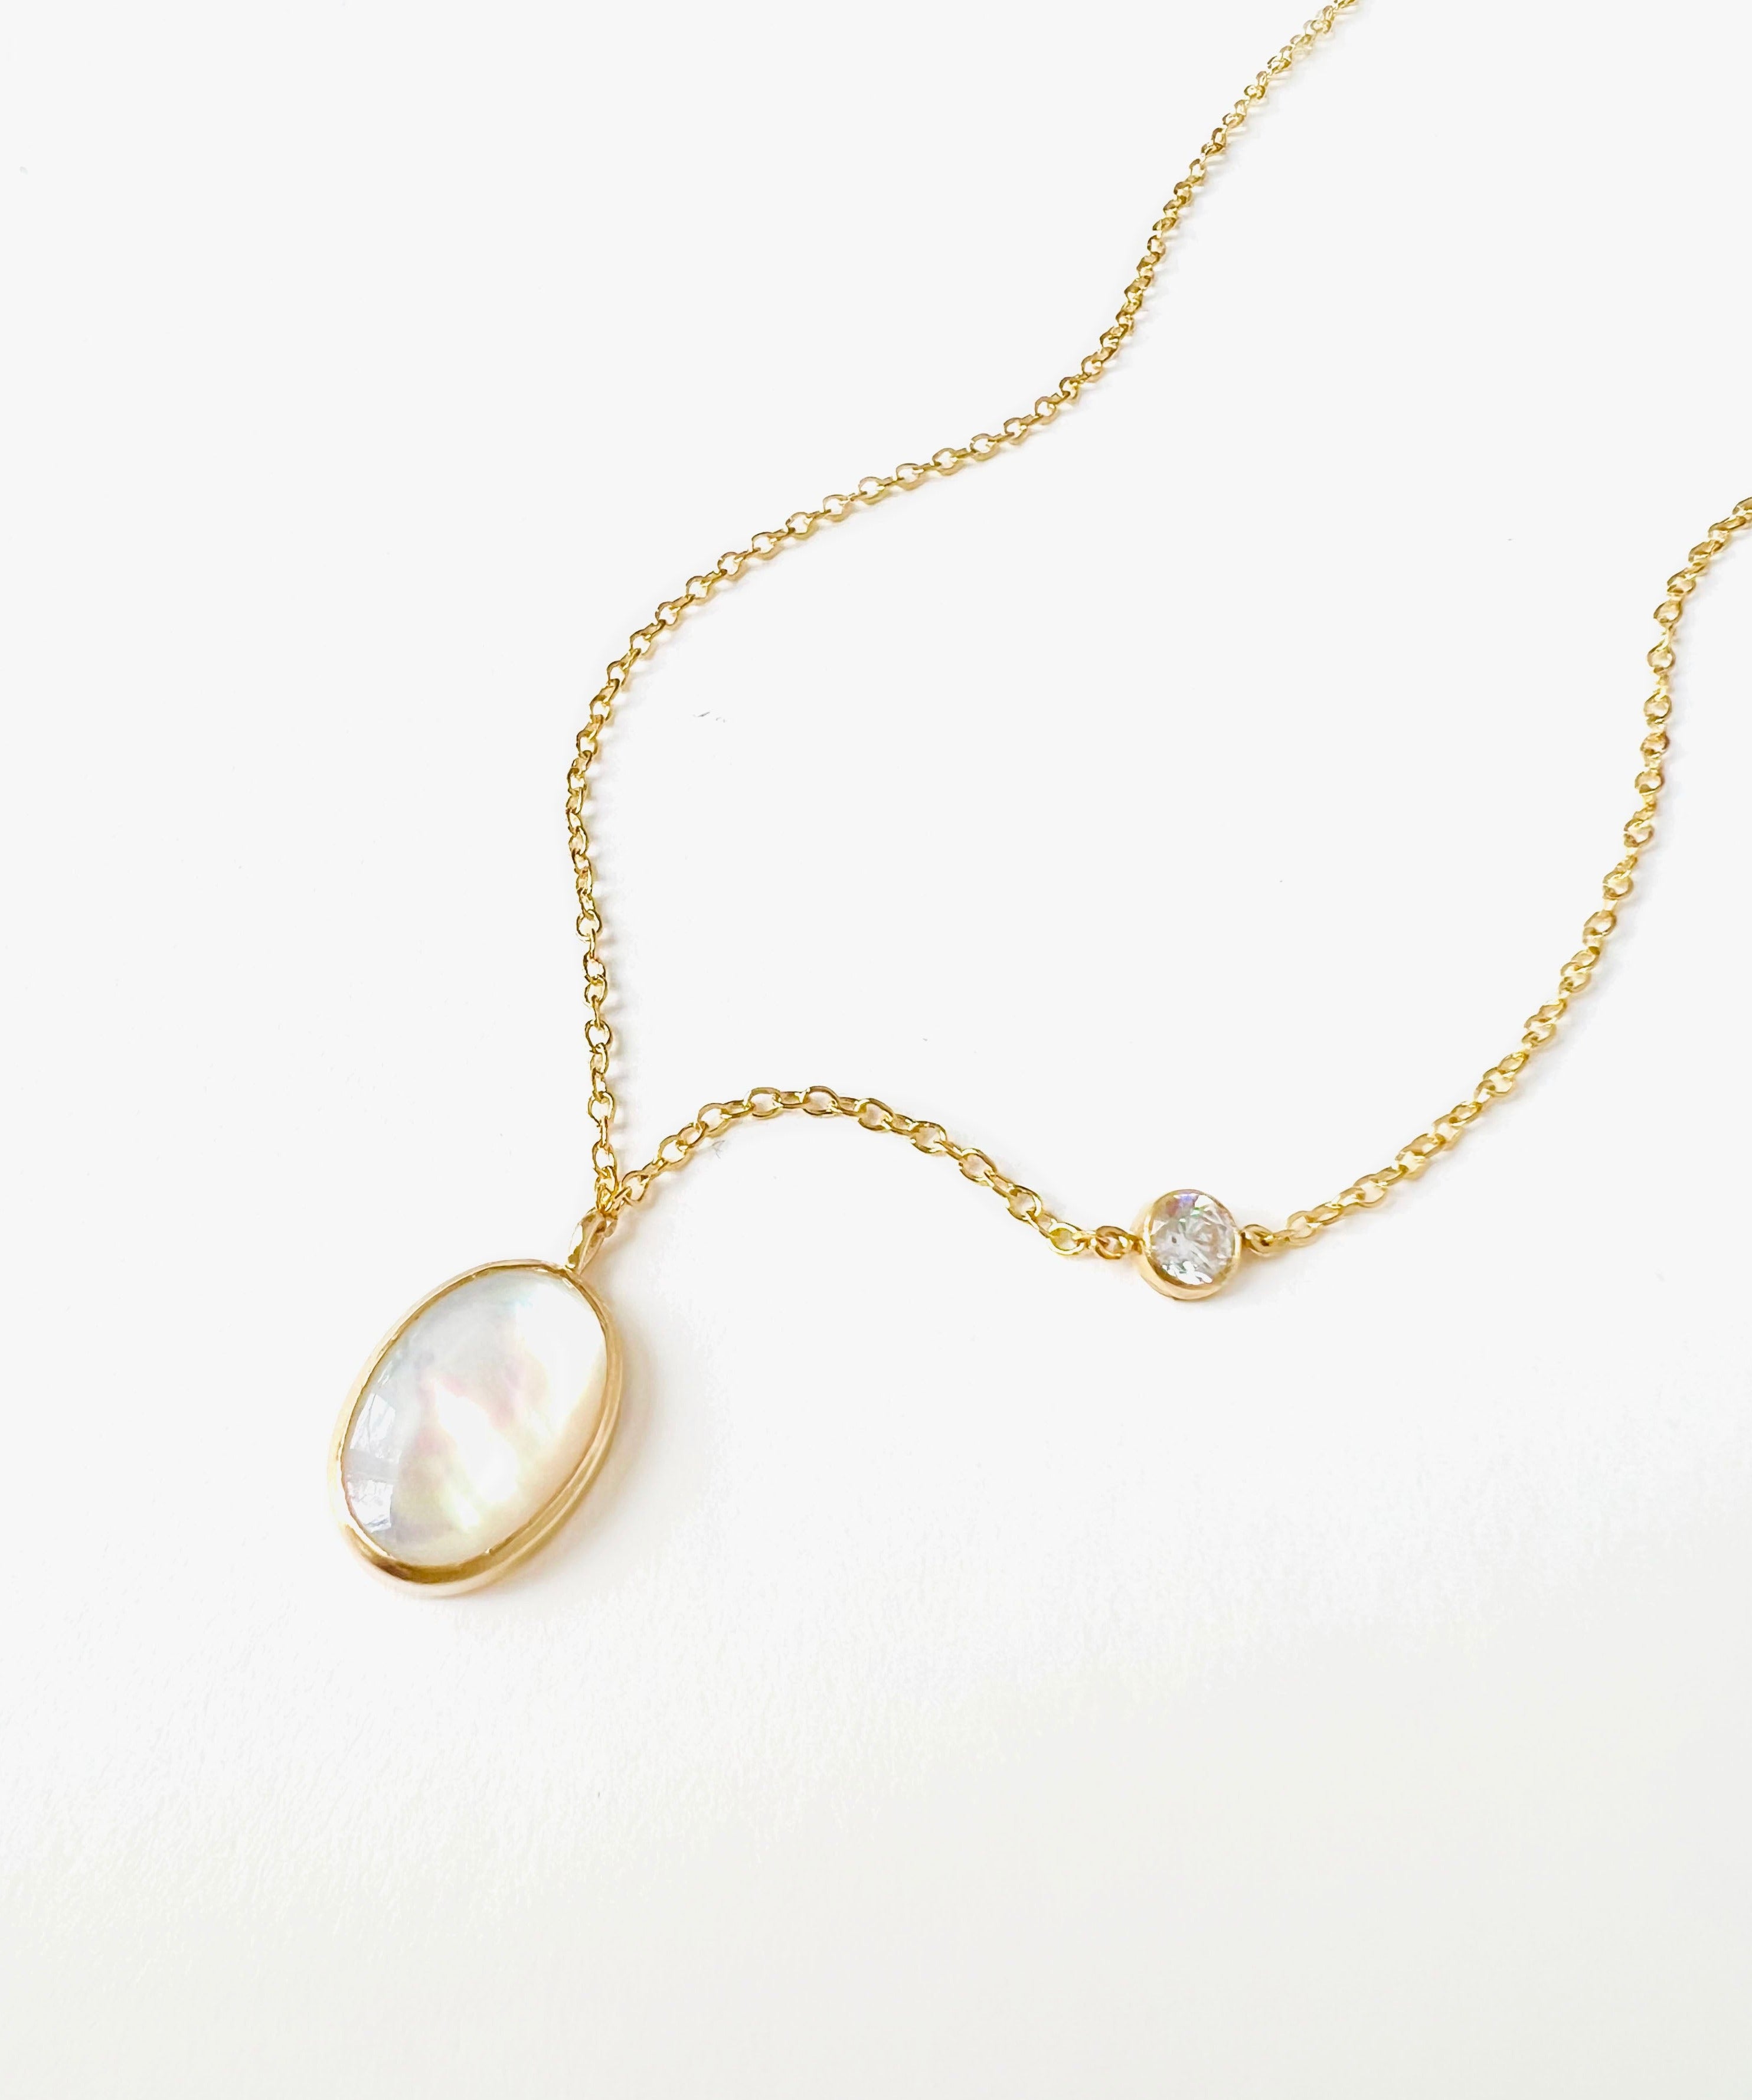 Oval Mother of Pearl Pendant necklace